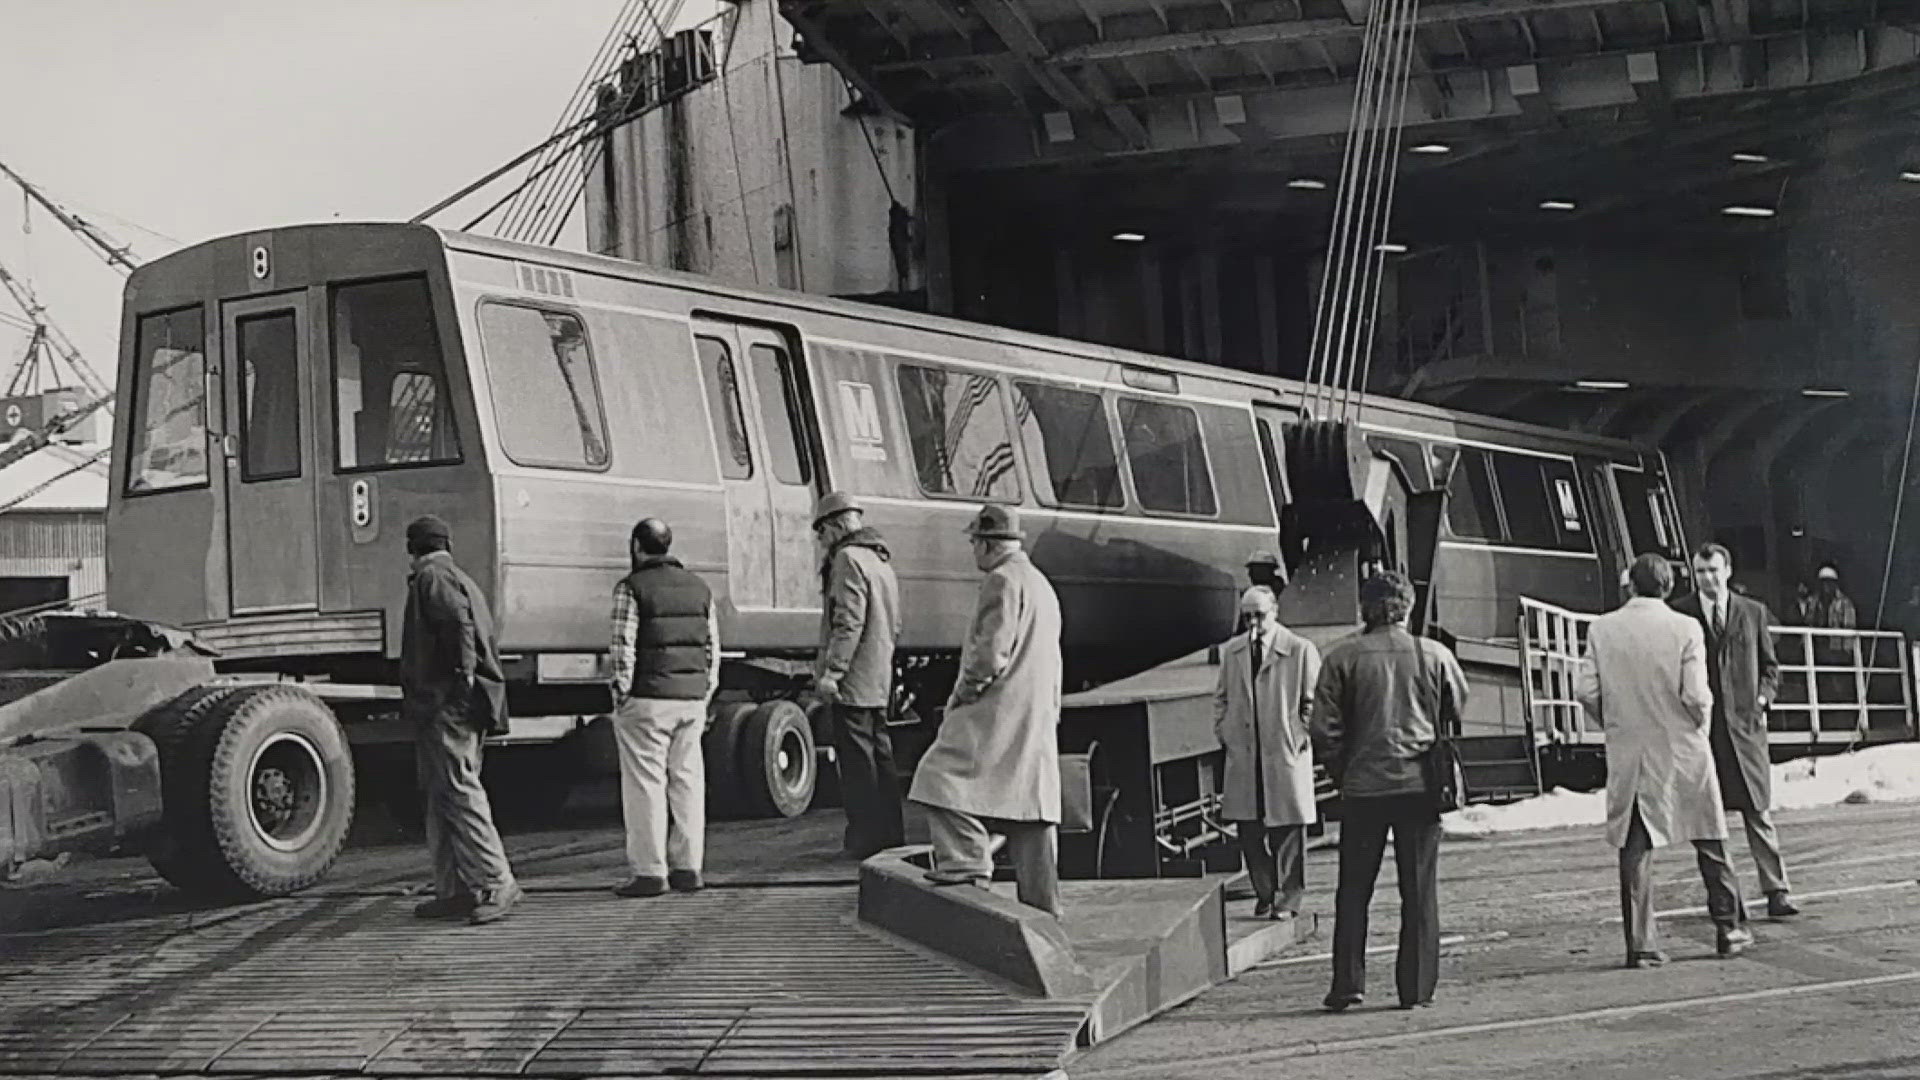 It's the end of the line for the trains that first entered service in the 1980s.